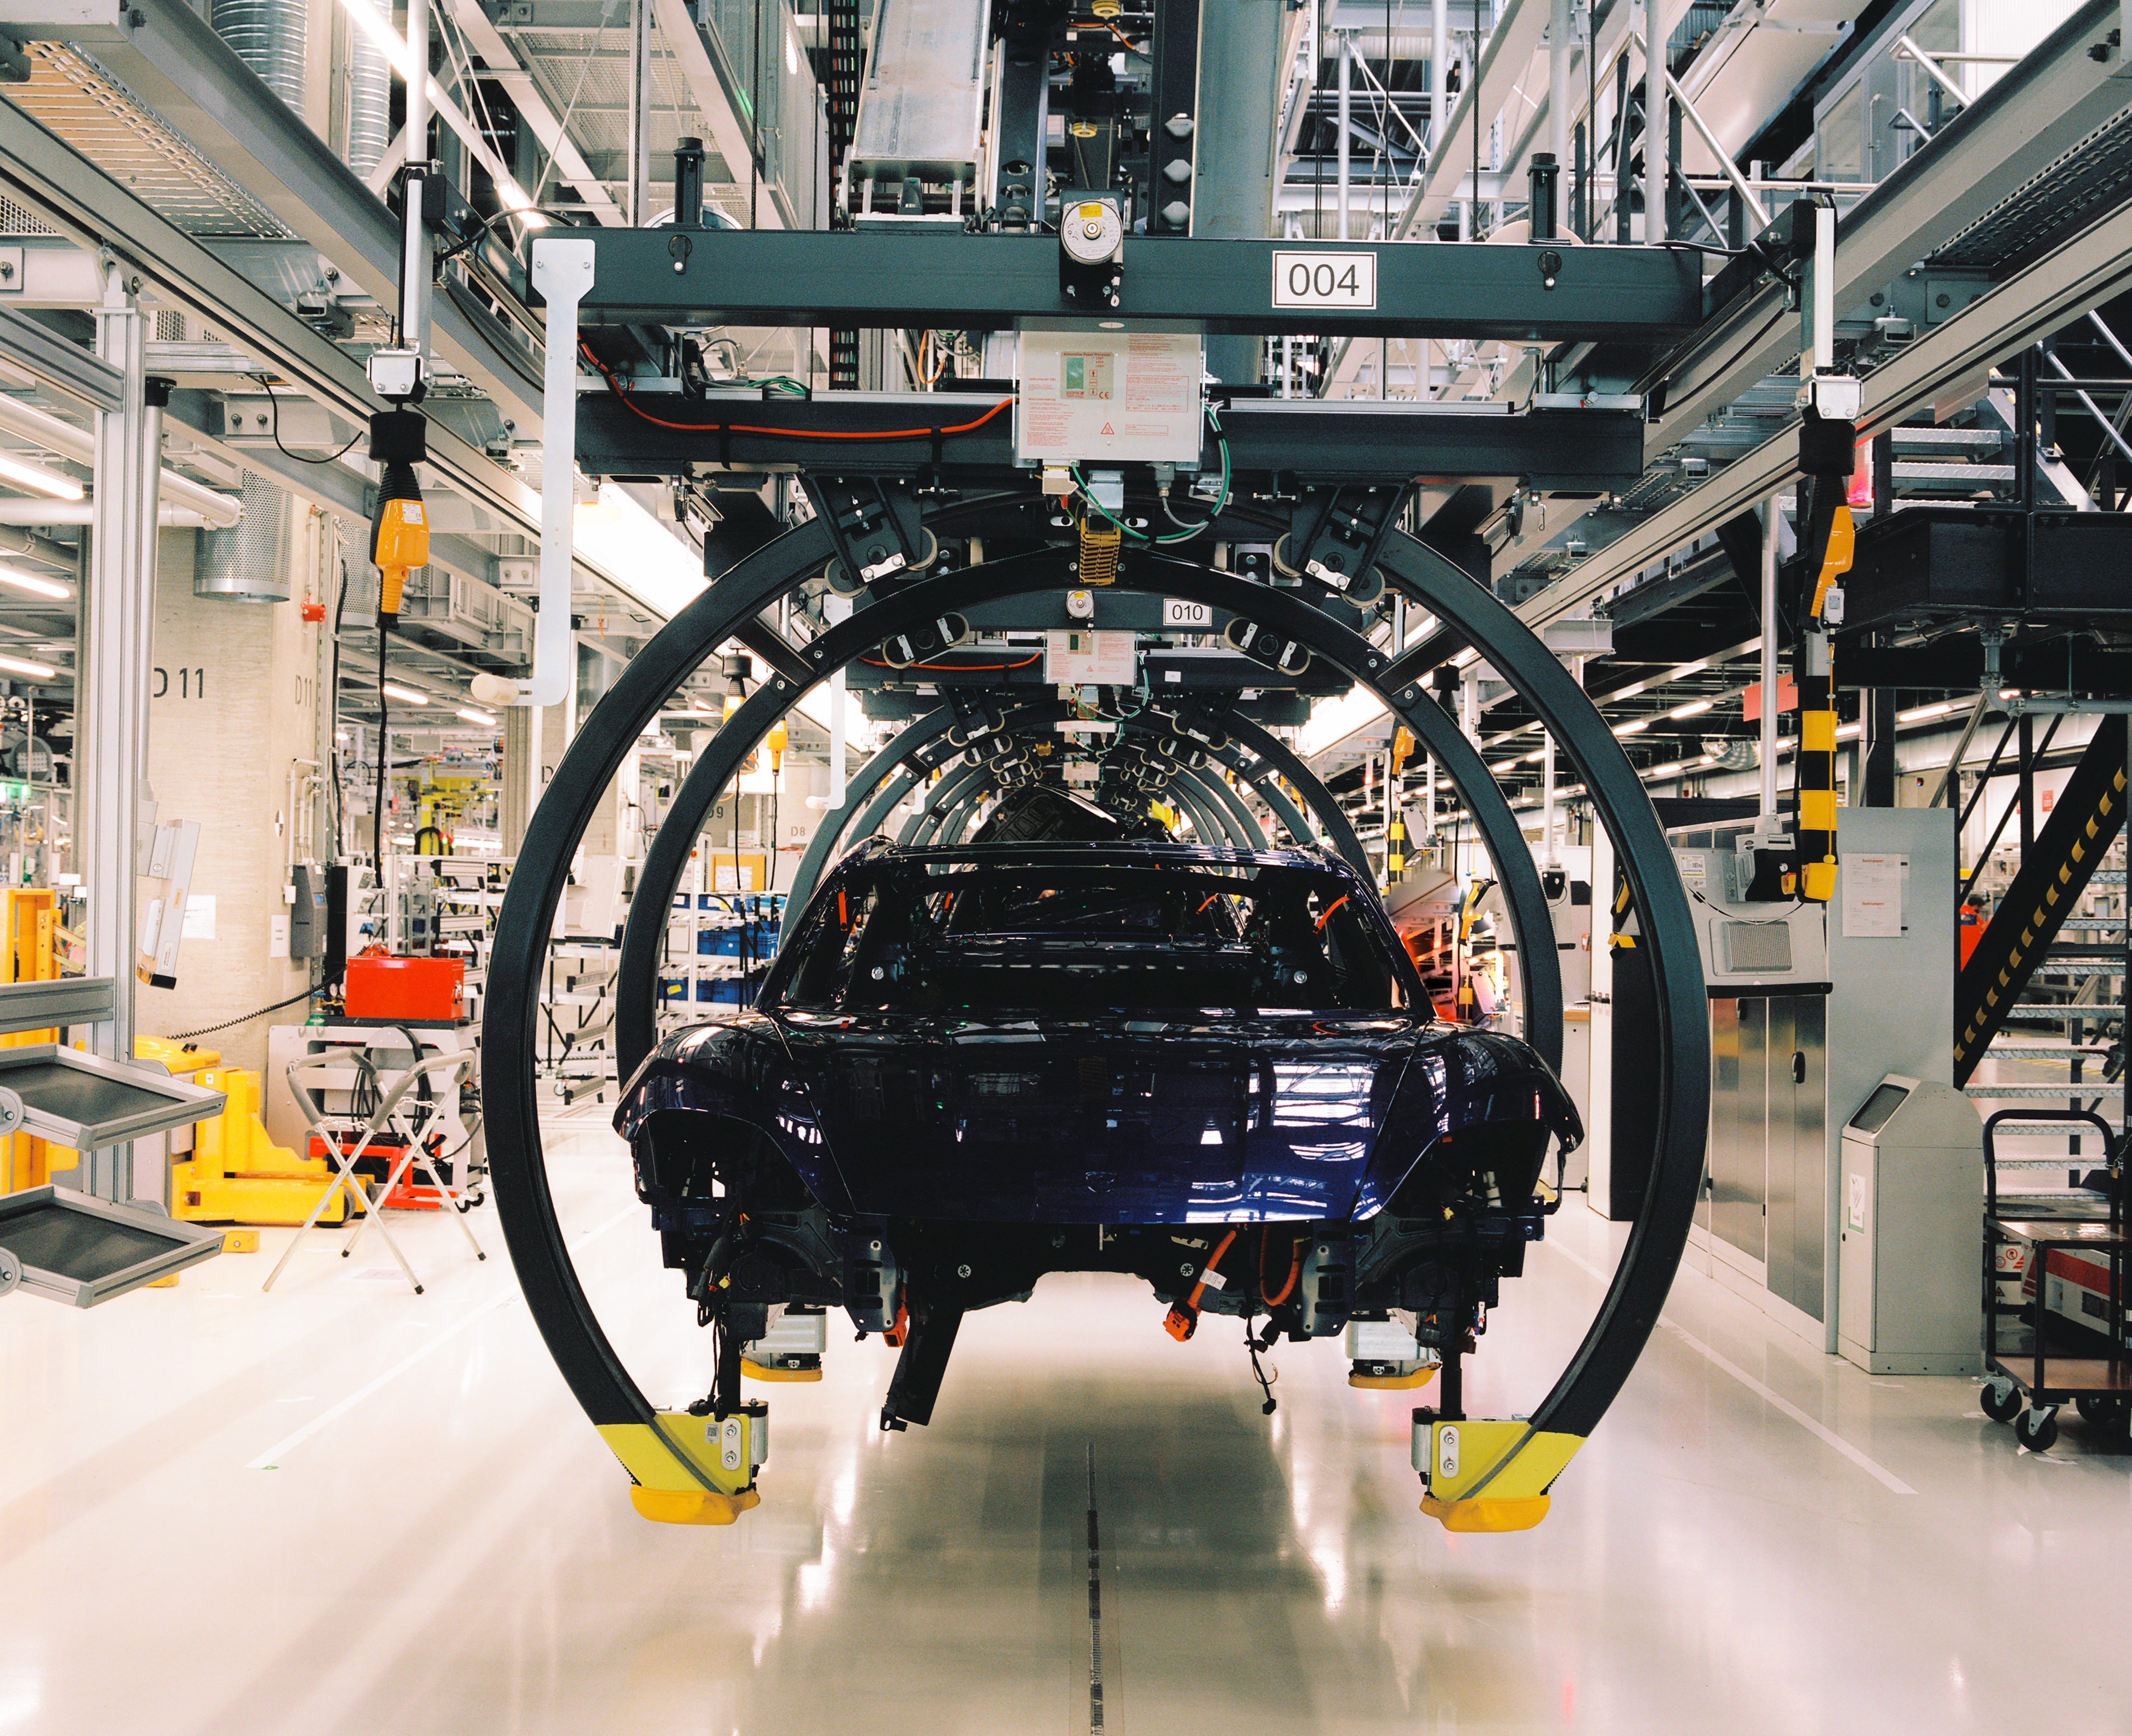 Porsche assembly line in modern automotive manufacturing plant